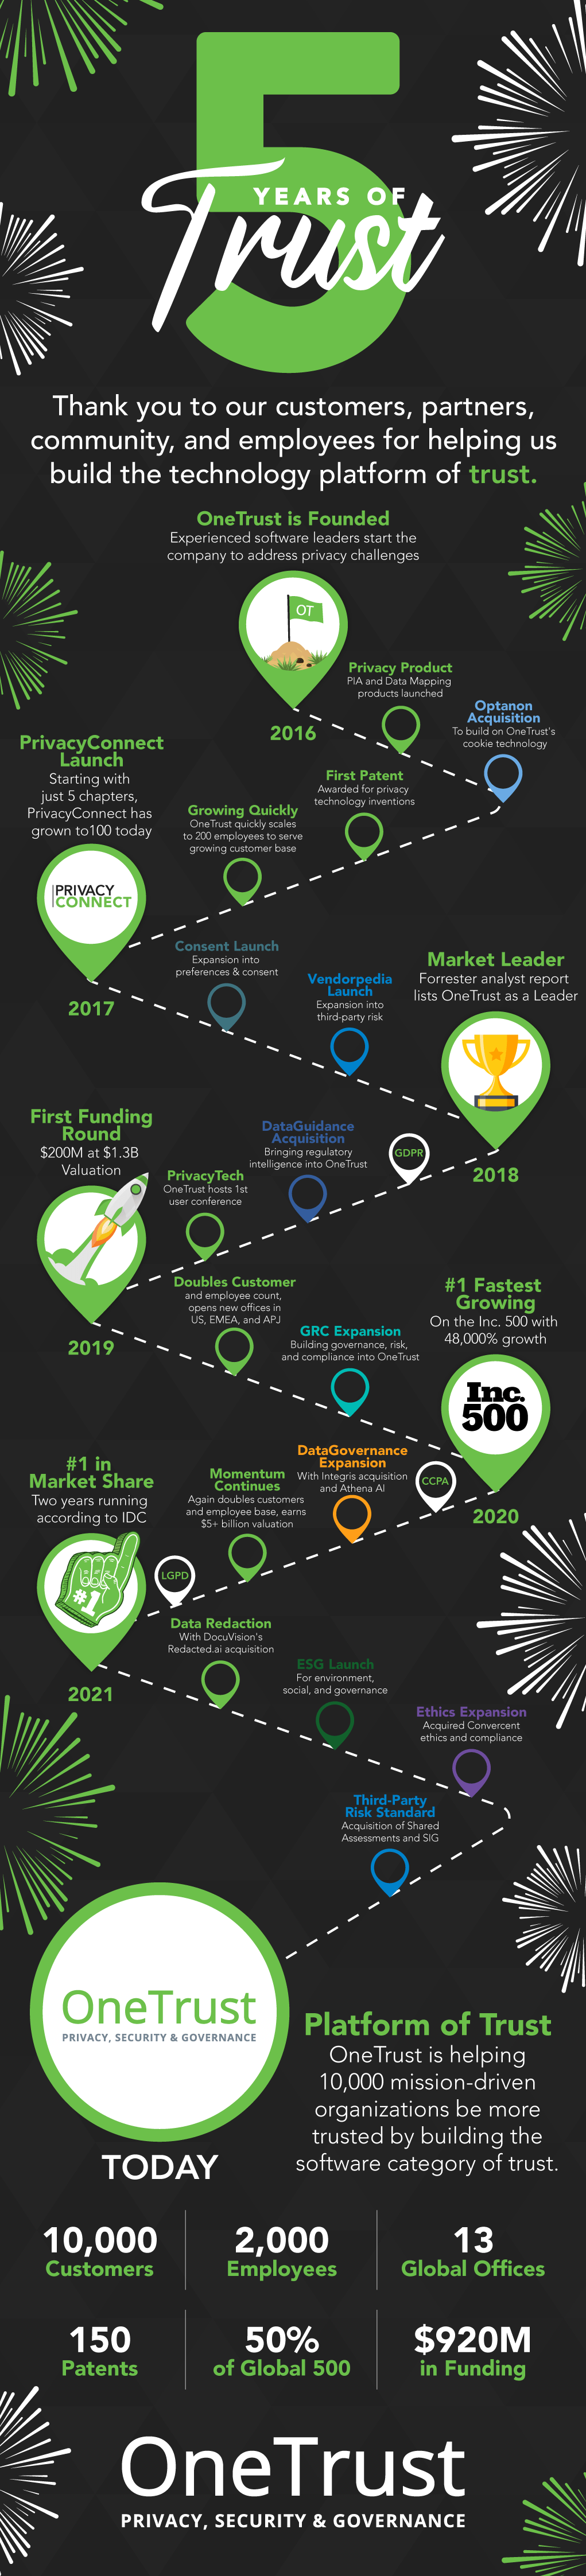 Inforgraphic showing the timeline of the history of onetrust in celebration of 5 years of trust